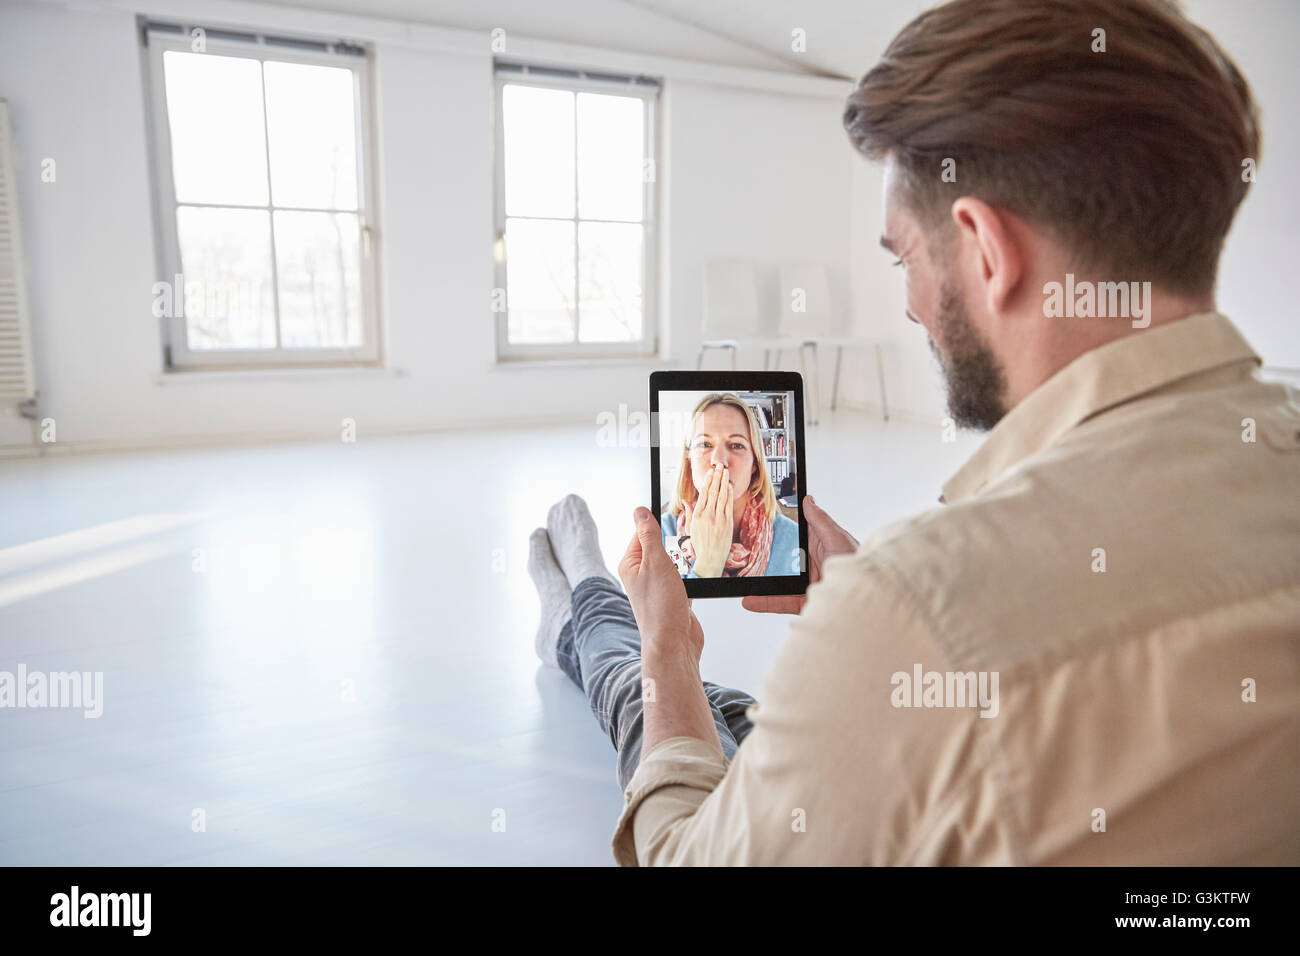 Girlfriend on digital tablet video call blowing a kiss to young man sitting on floor Stock Photo